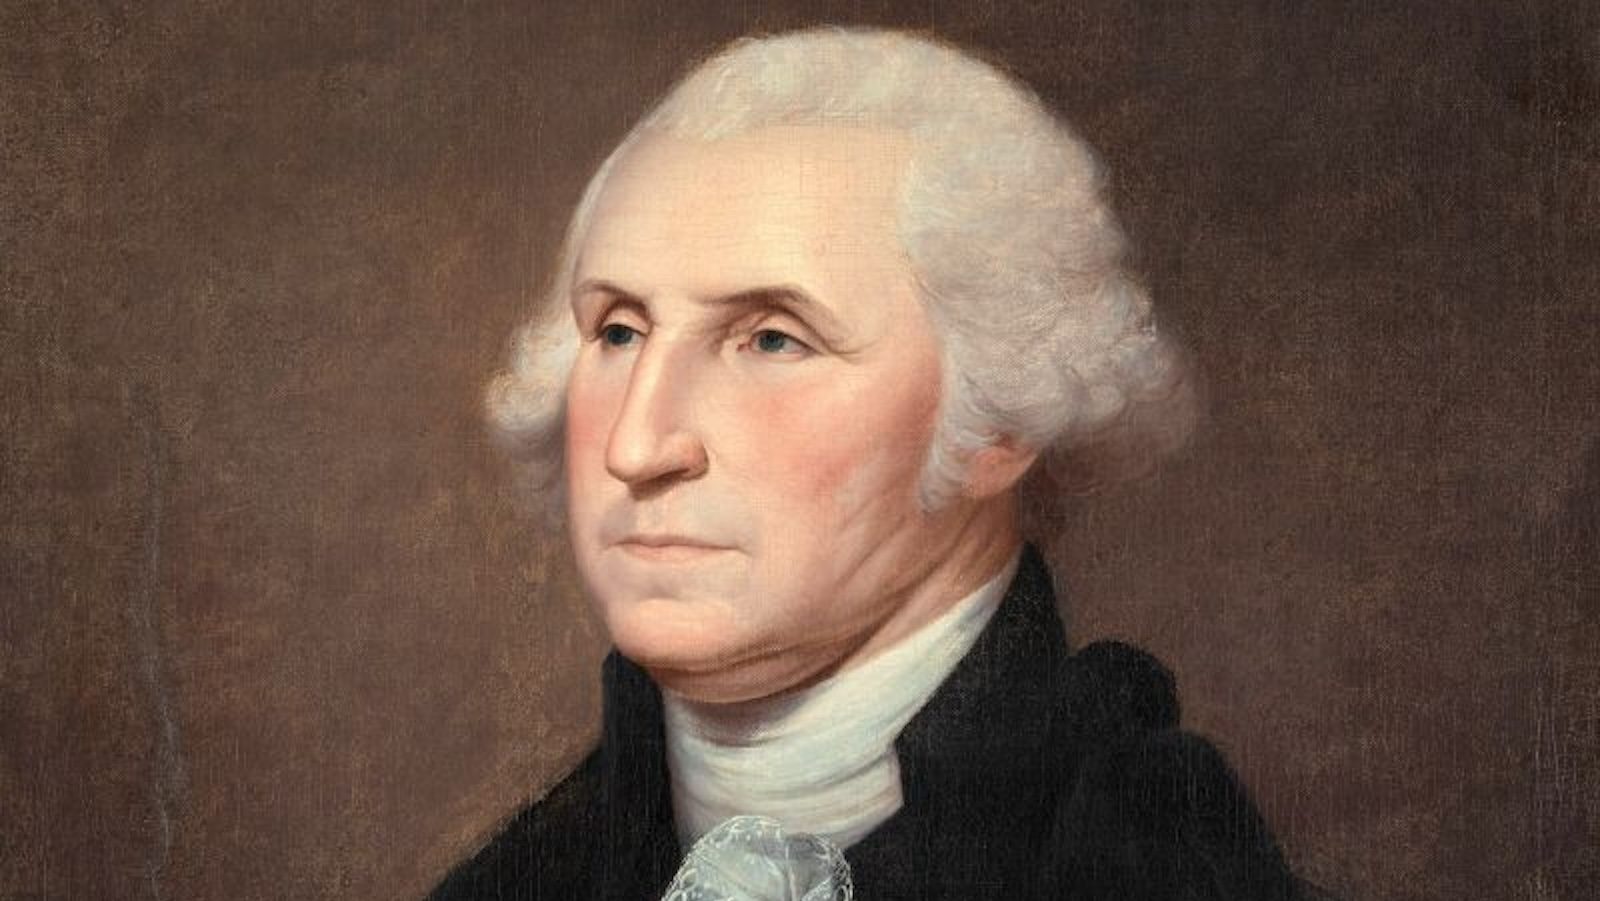 Secrets of George Washington’s family revealed by DNA sample from 19th century unmarked graves